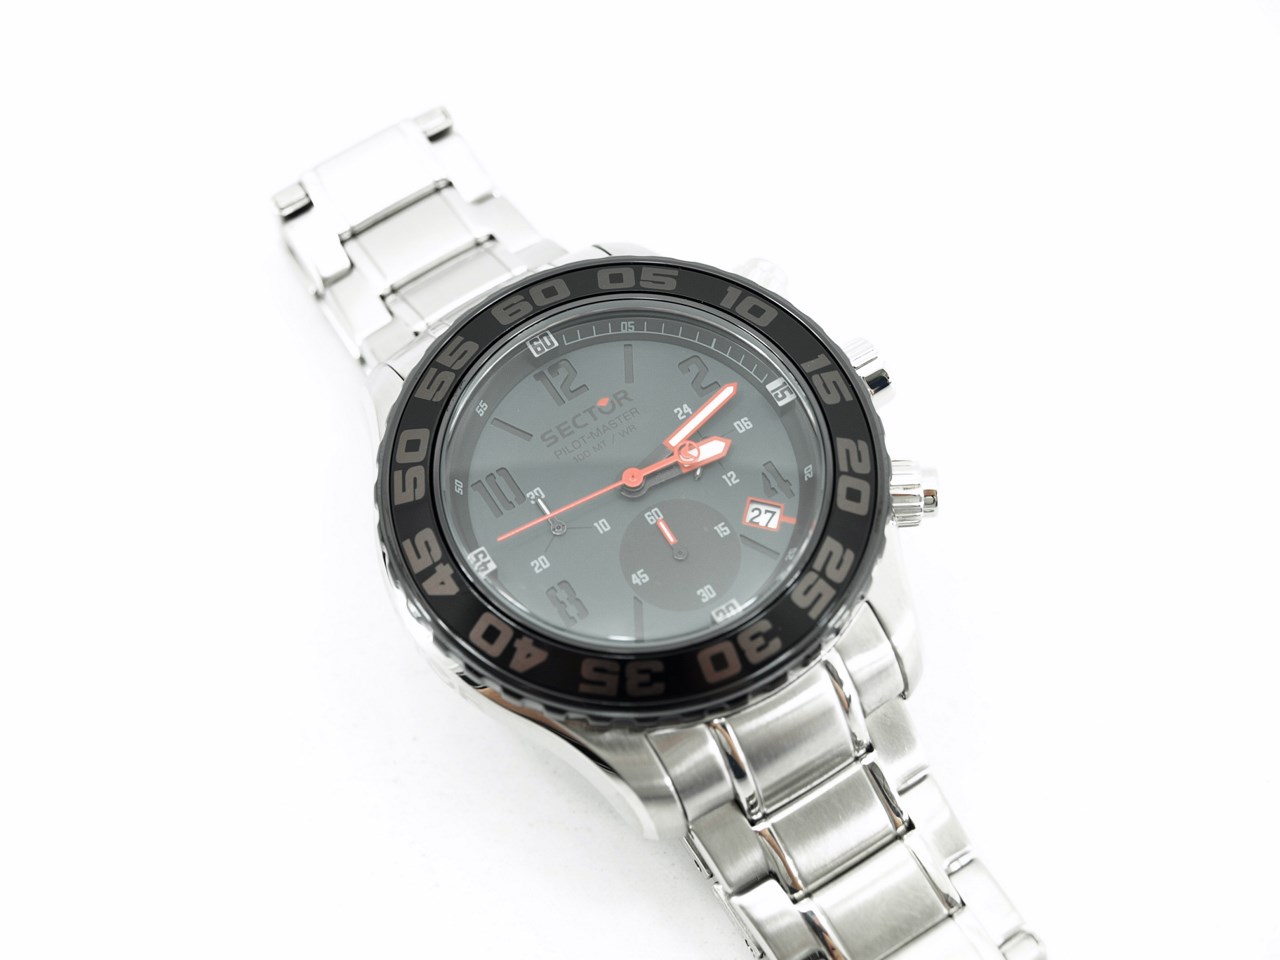 SECTOR Pilot Master R3273679025 Watch Review